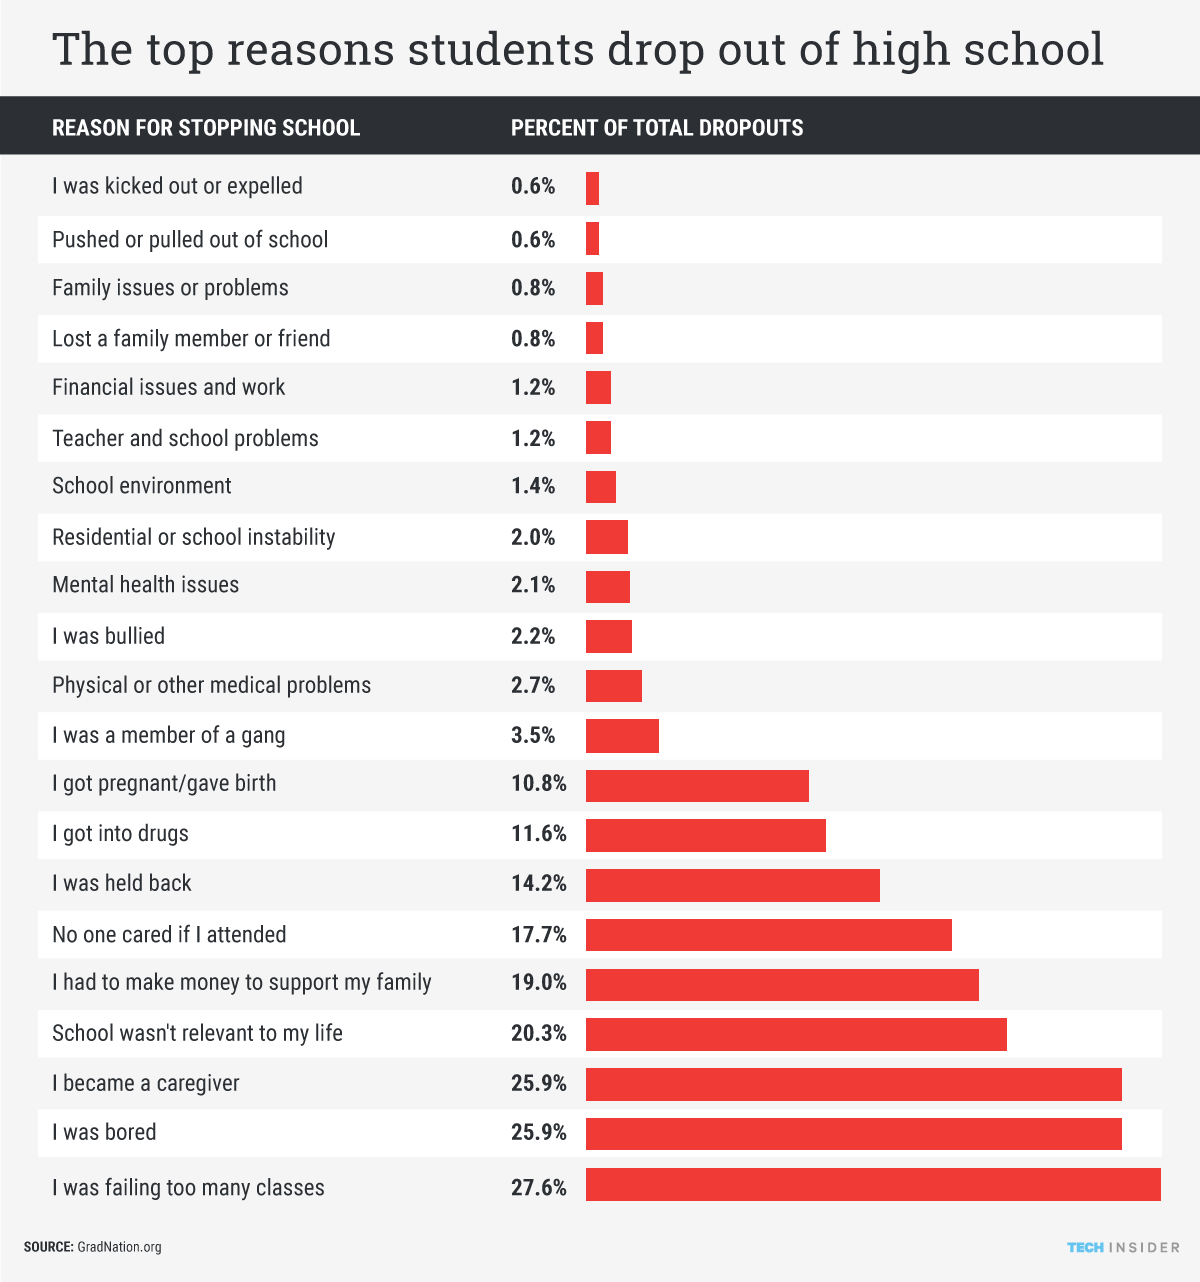 The most common reasons students drop out of high school are heartbreaking